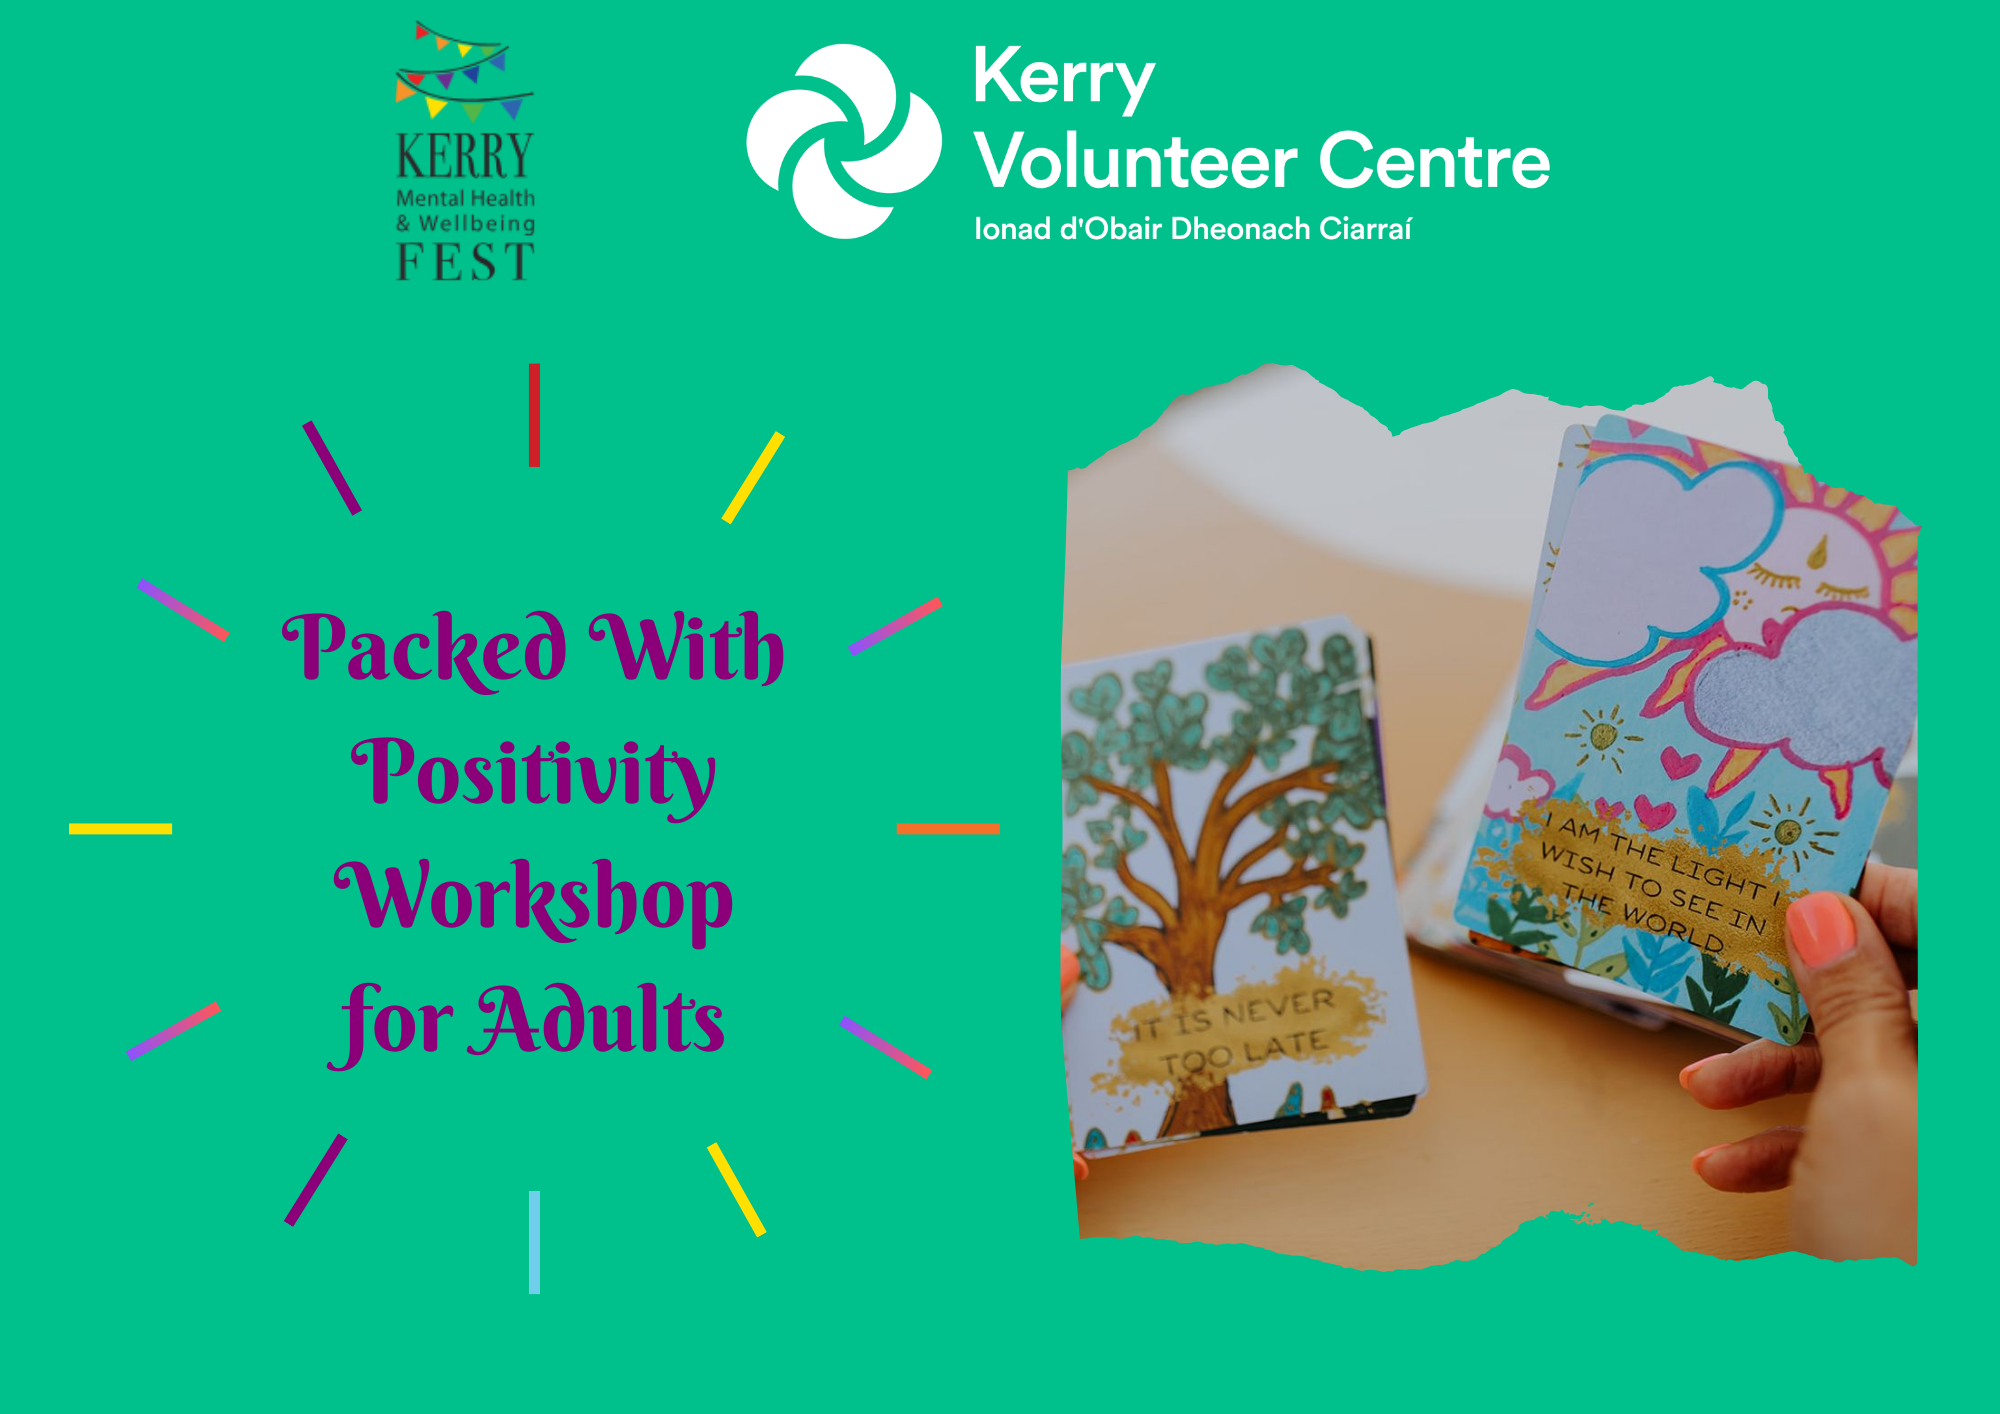 Packed With Positivity - Killarney Adult Workshop:4pm to 6pm event at Kerry Mental Health & Wellbeing Fest 2022